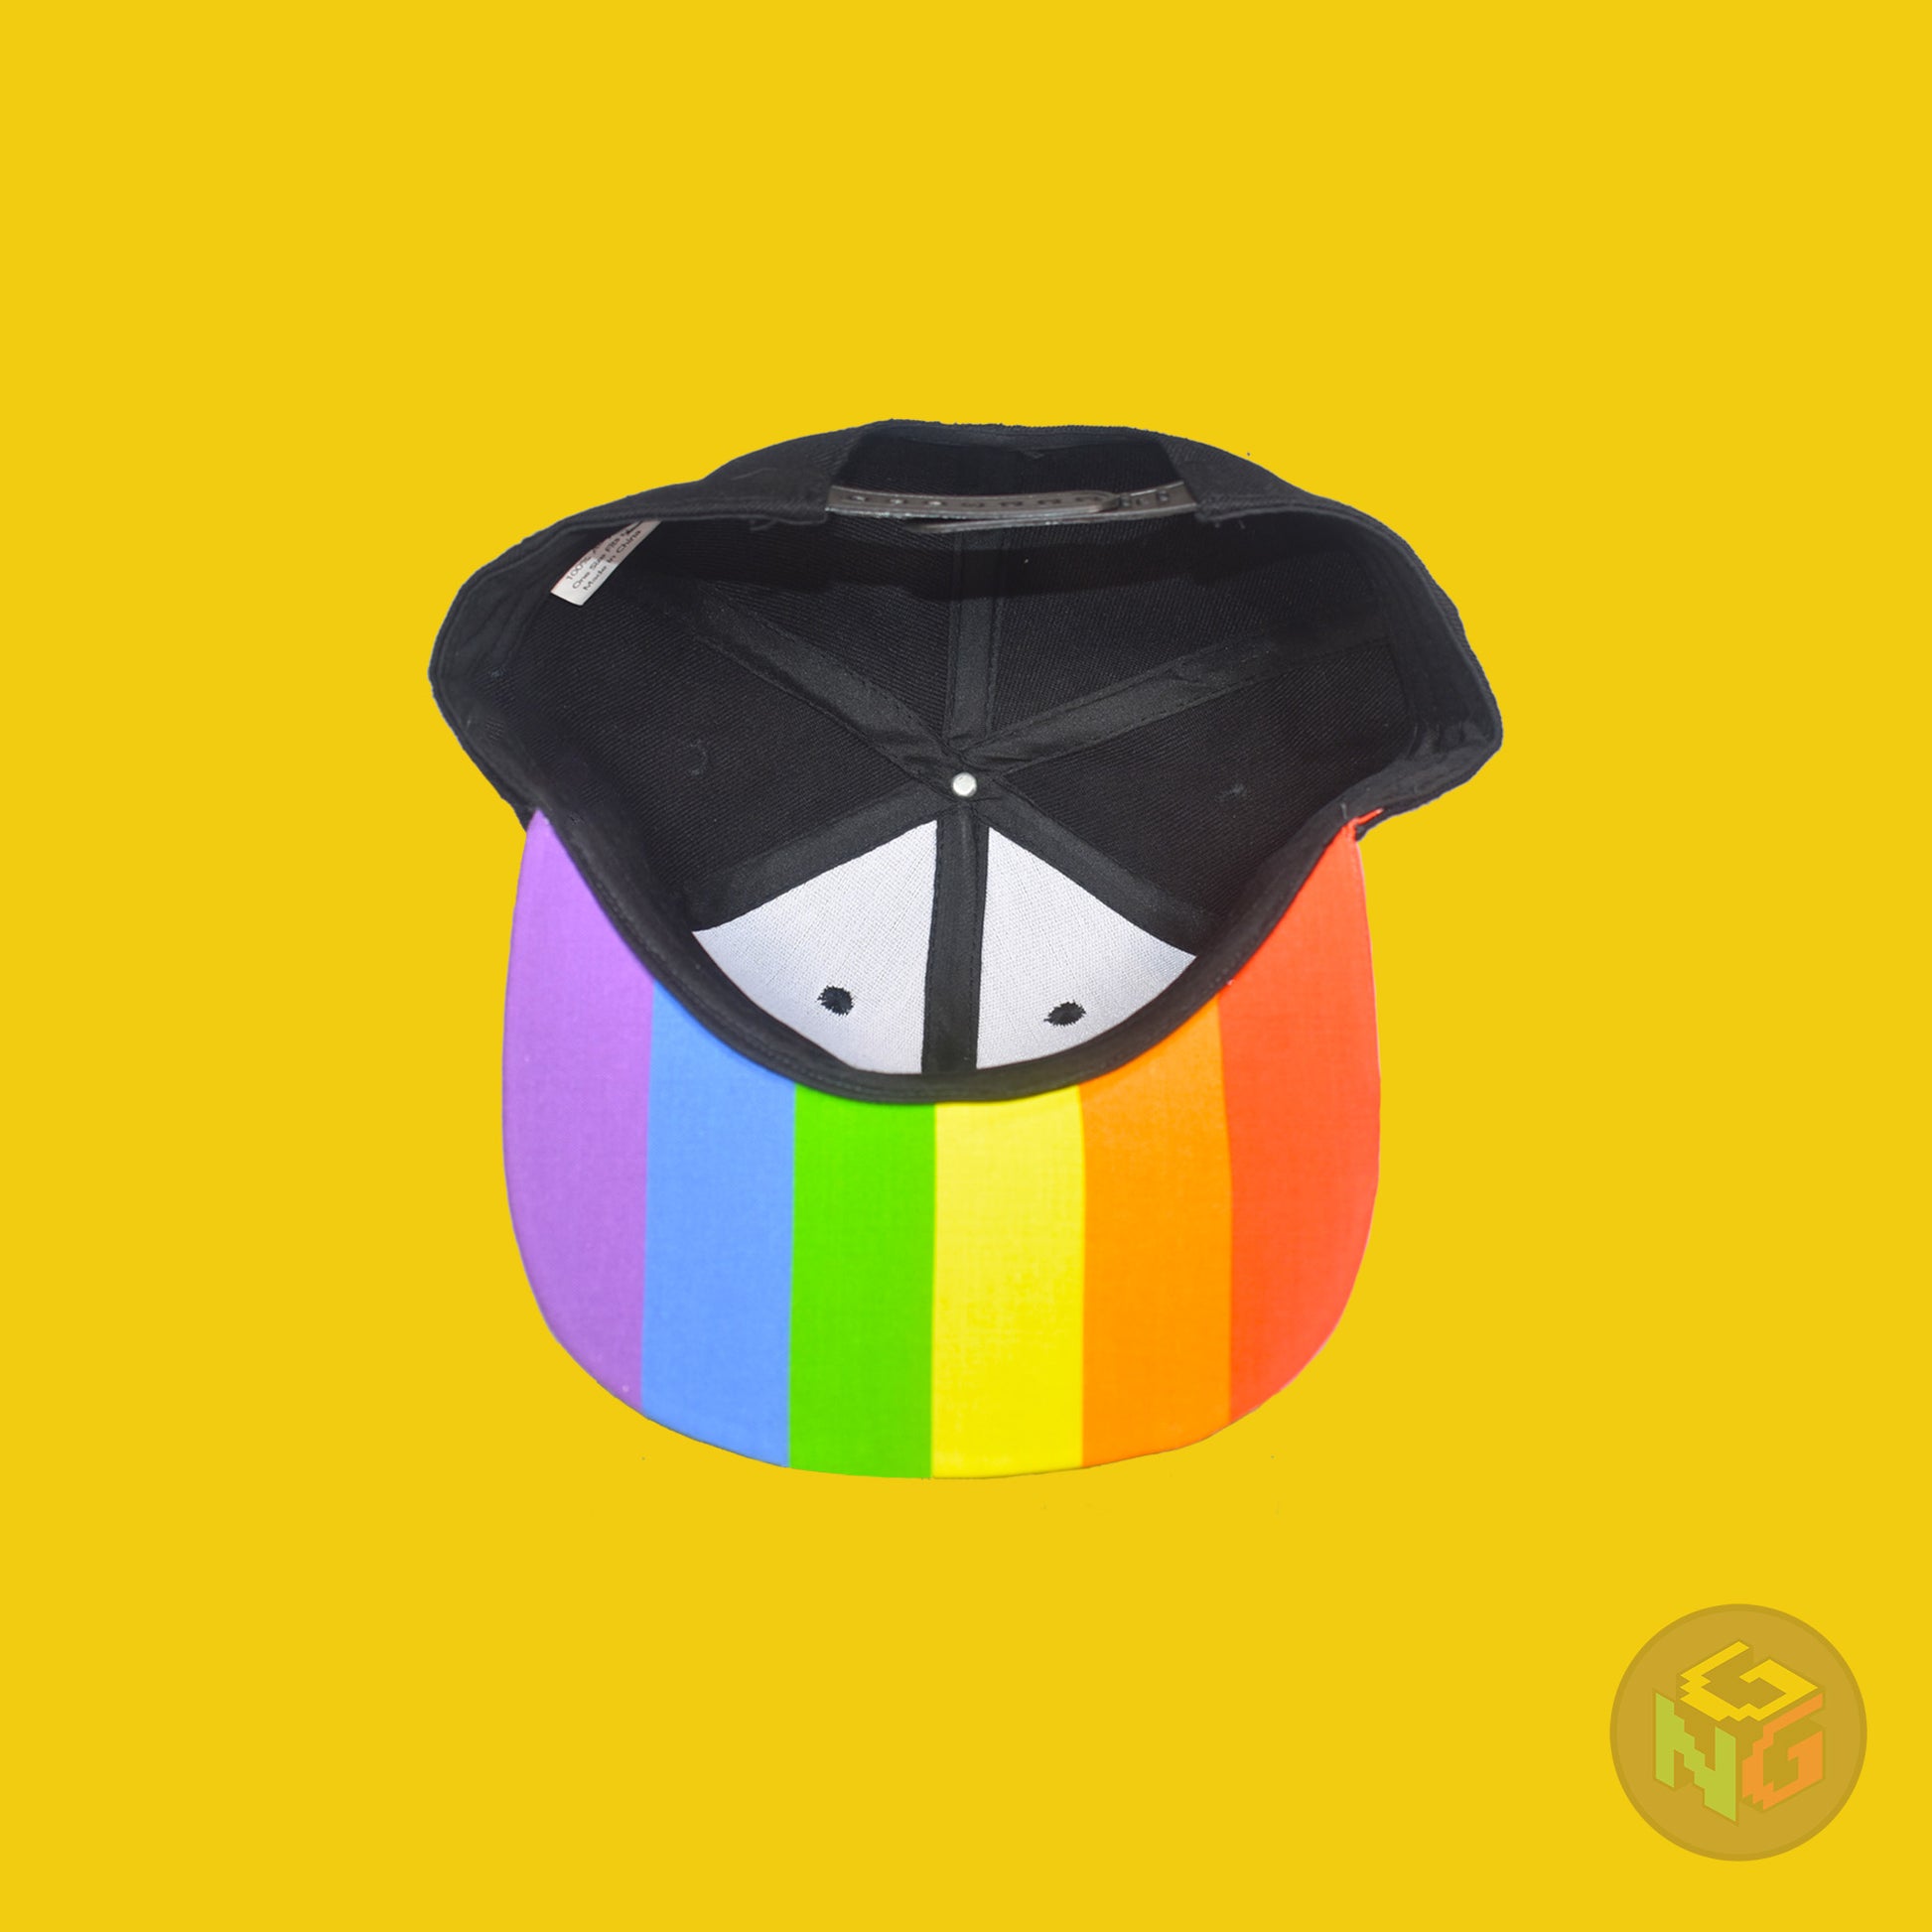 Black flat bill snapback hat. The brim has the rainbow pride flag on both sides and the front of the hat has the word “LESBIAN” in rainbow letters. Underside view